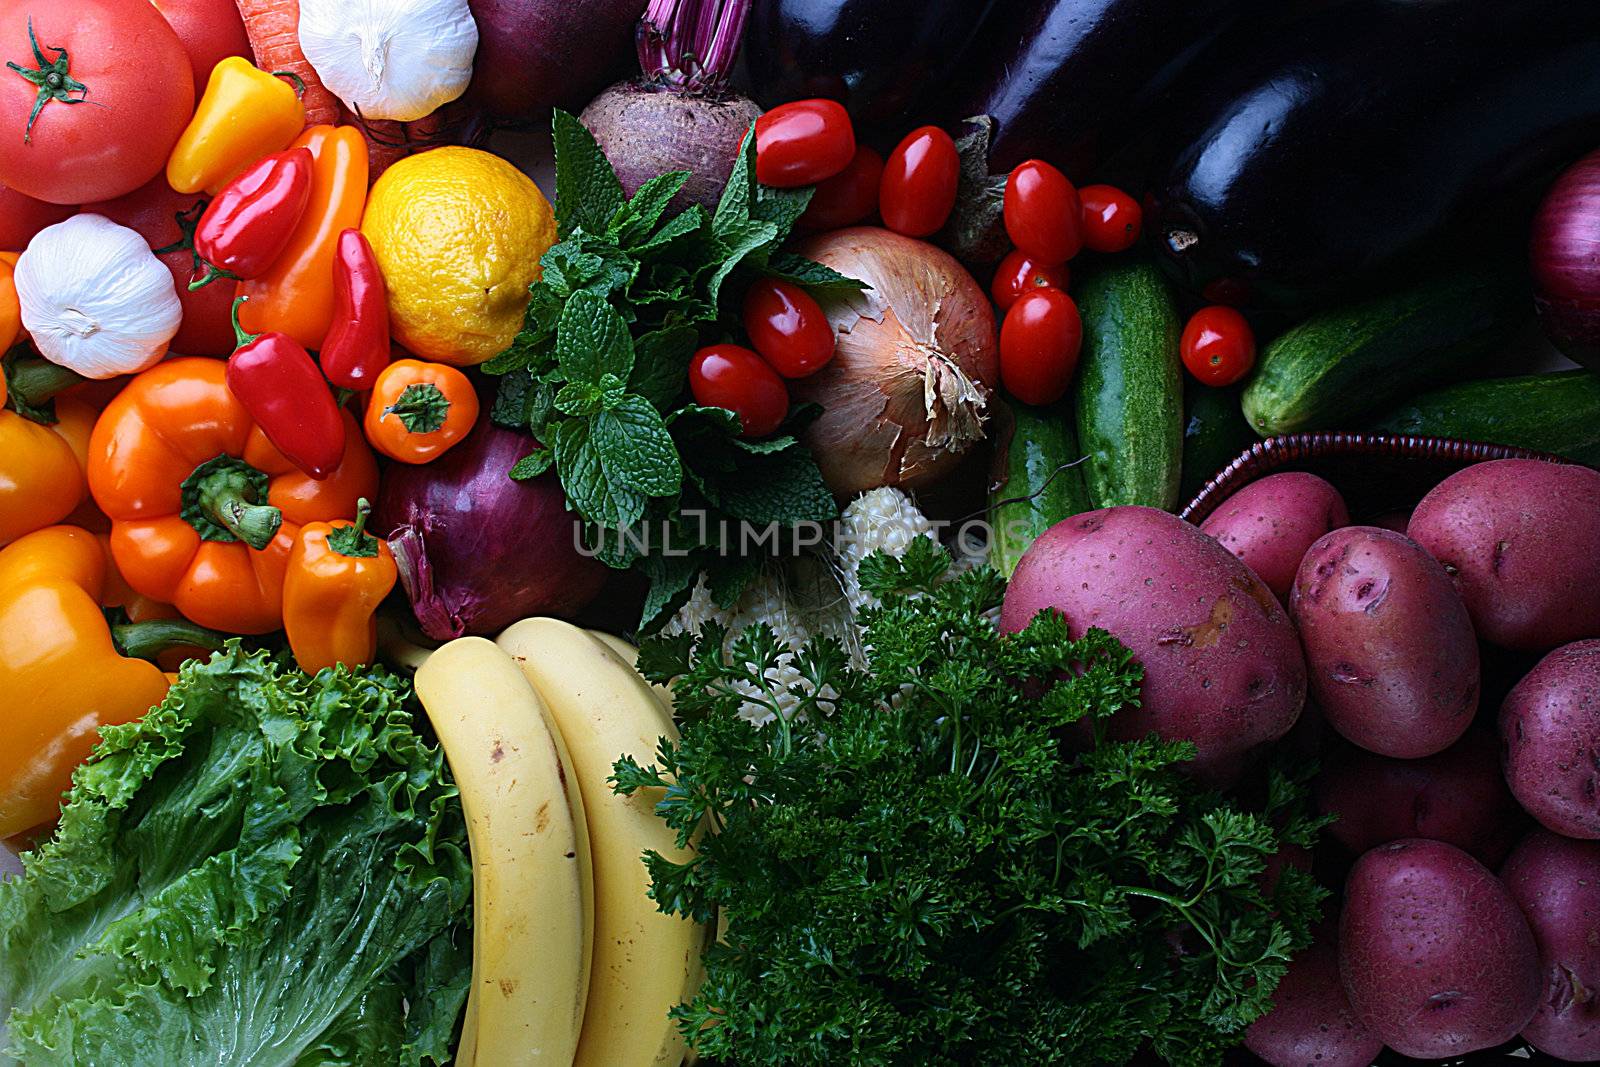 Vegetables and fruit are collected as the basic components of any culinary recipe.